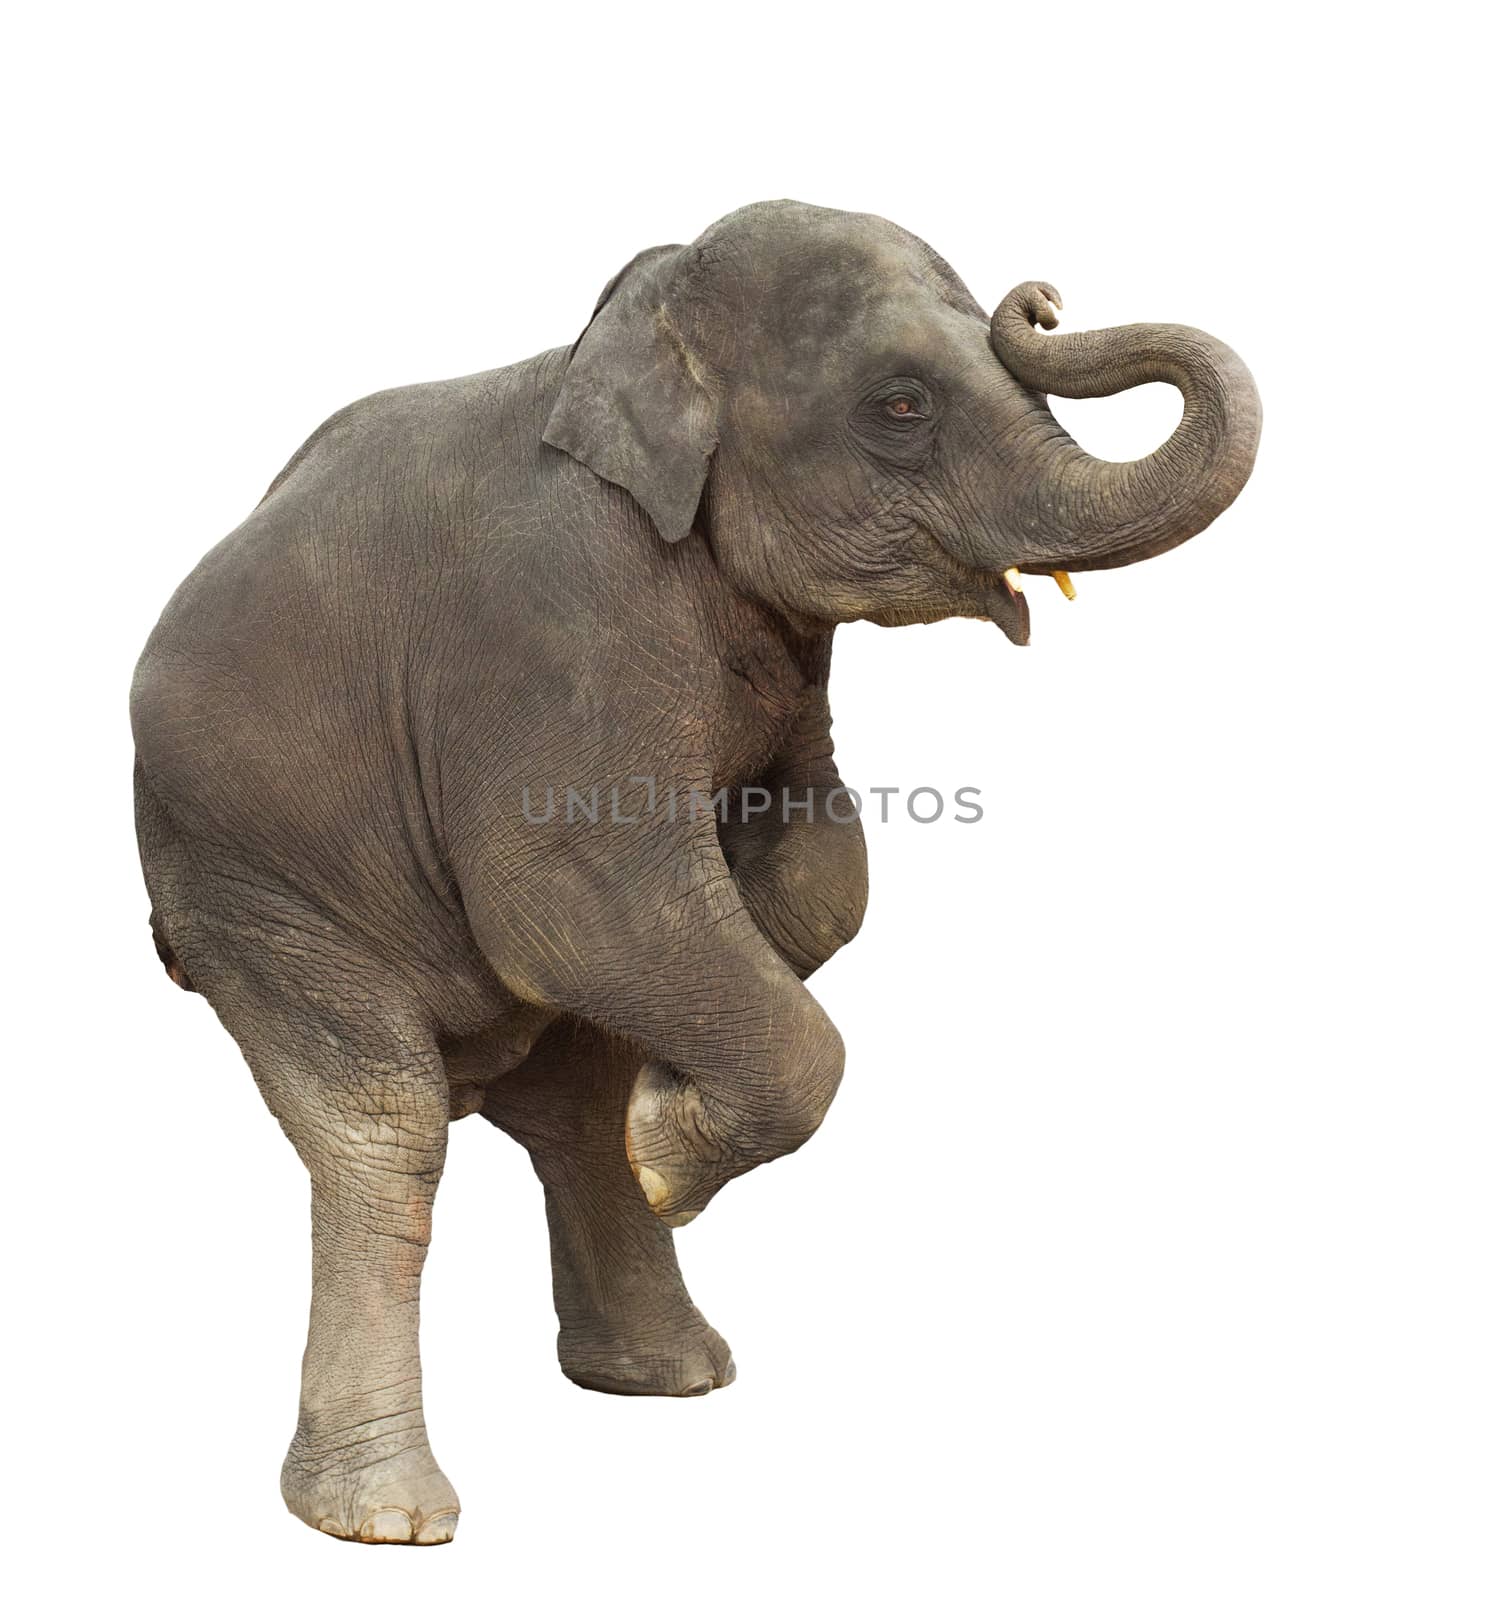 young asia elephant kid playing lifting front legs to show isolated white background